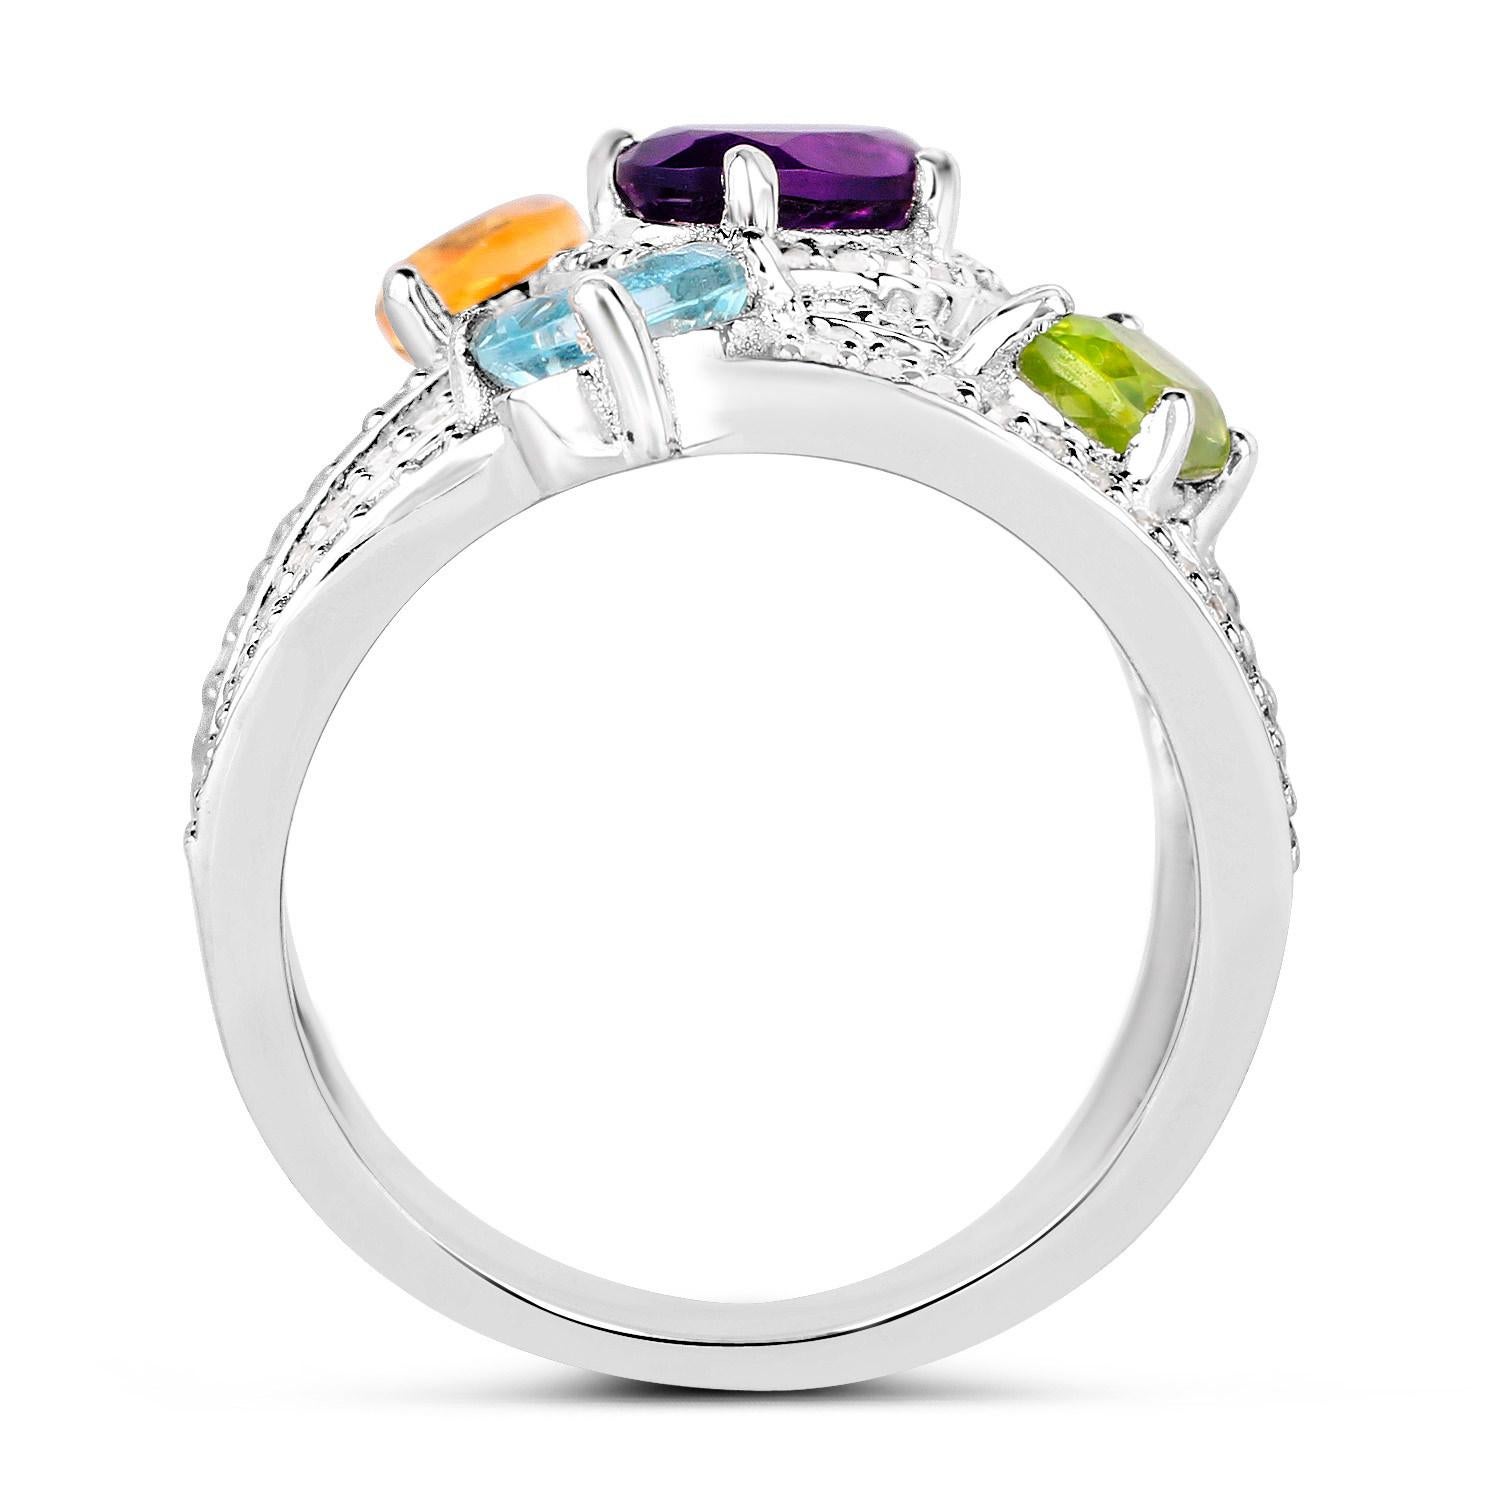 Mixed Cut Natural Multicolor Gemstones Cocktail Ring 3.70 Carats For Sale